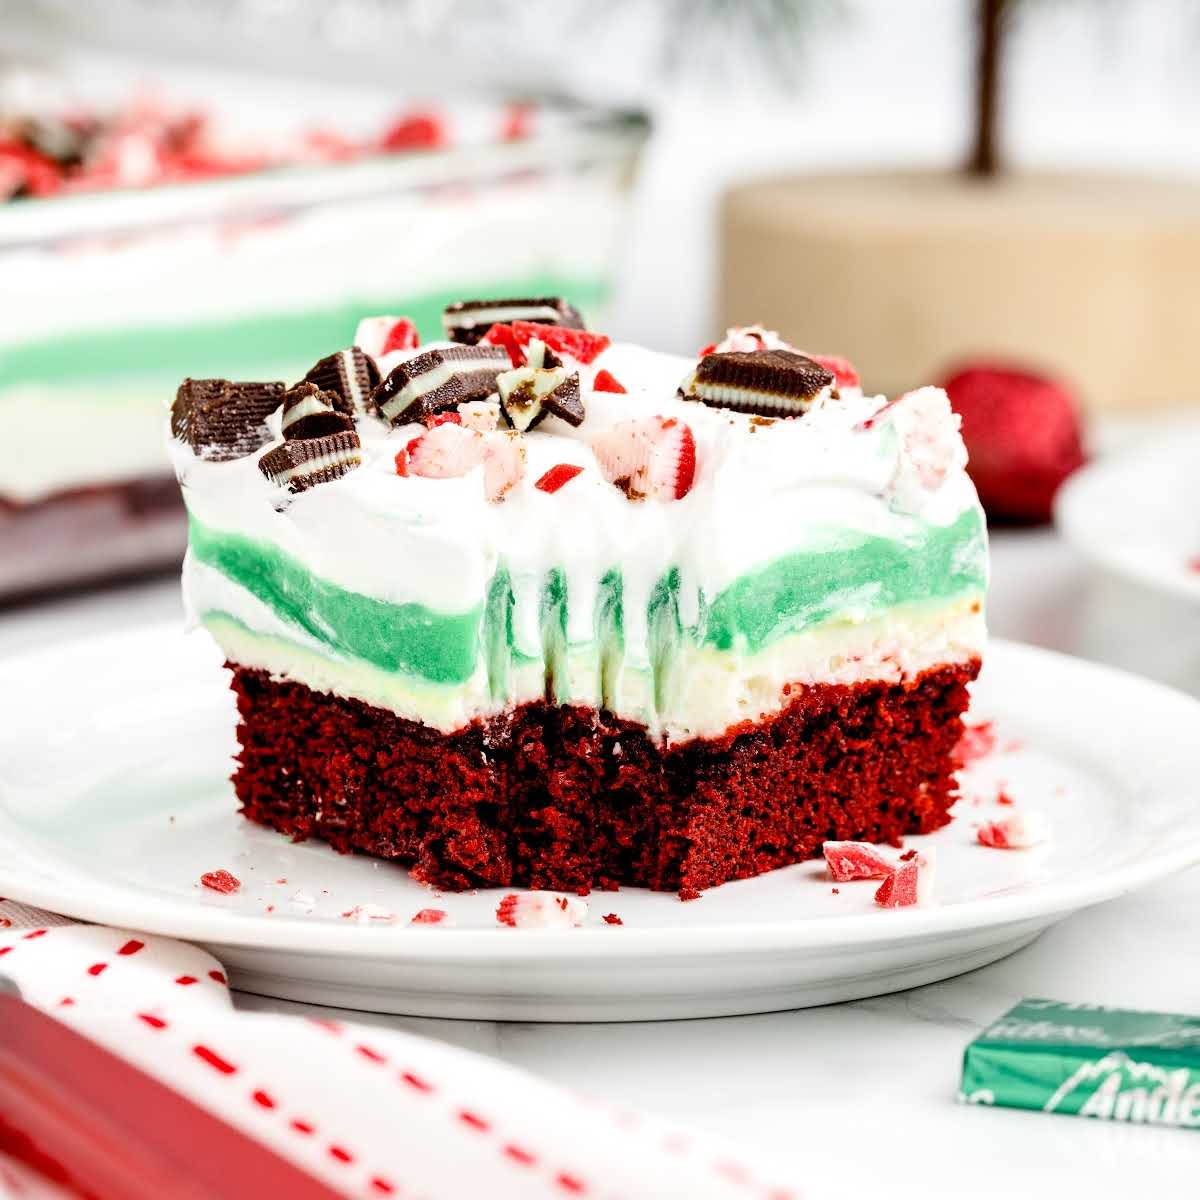 Lasagna Cake -The cake itself is red velvet with buttercream filling.  Chocolate covered ri… | Chocolate rice krispie treats, Rice krispie treats,  Butter cream sauce